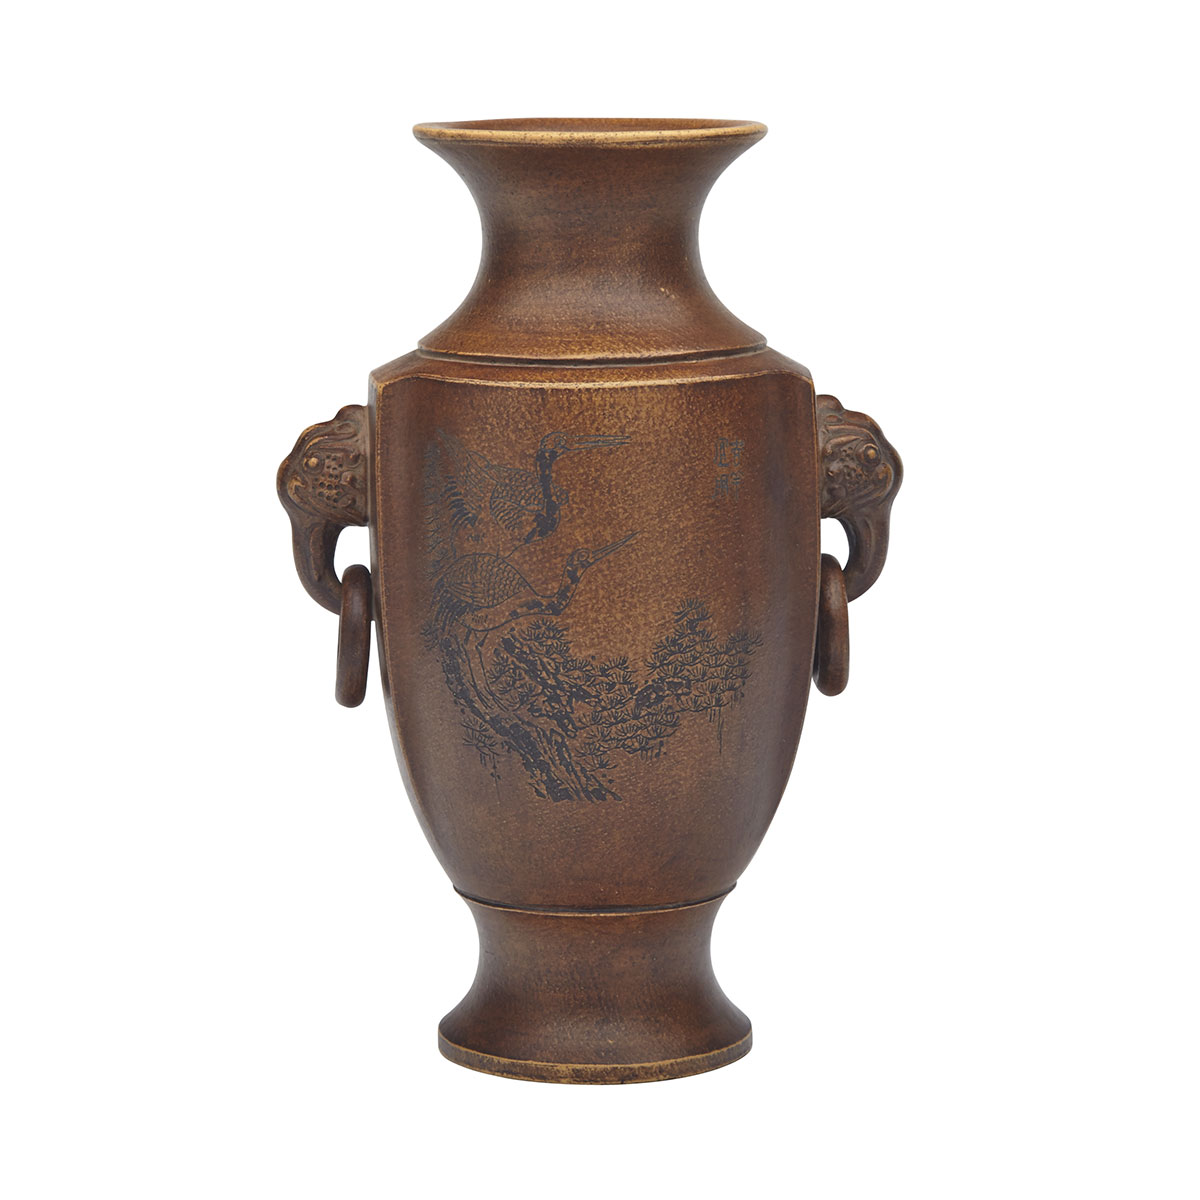 Inscribed Yixing Baluster Vase, Republican Period